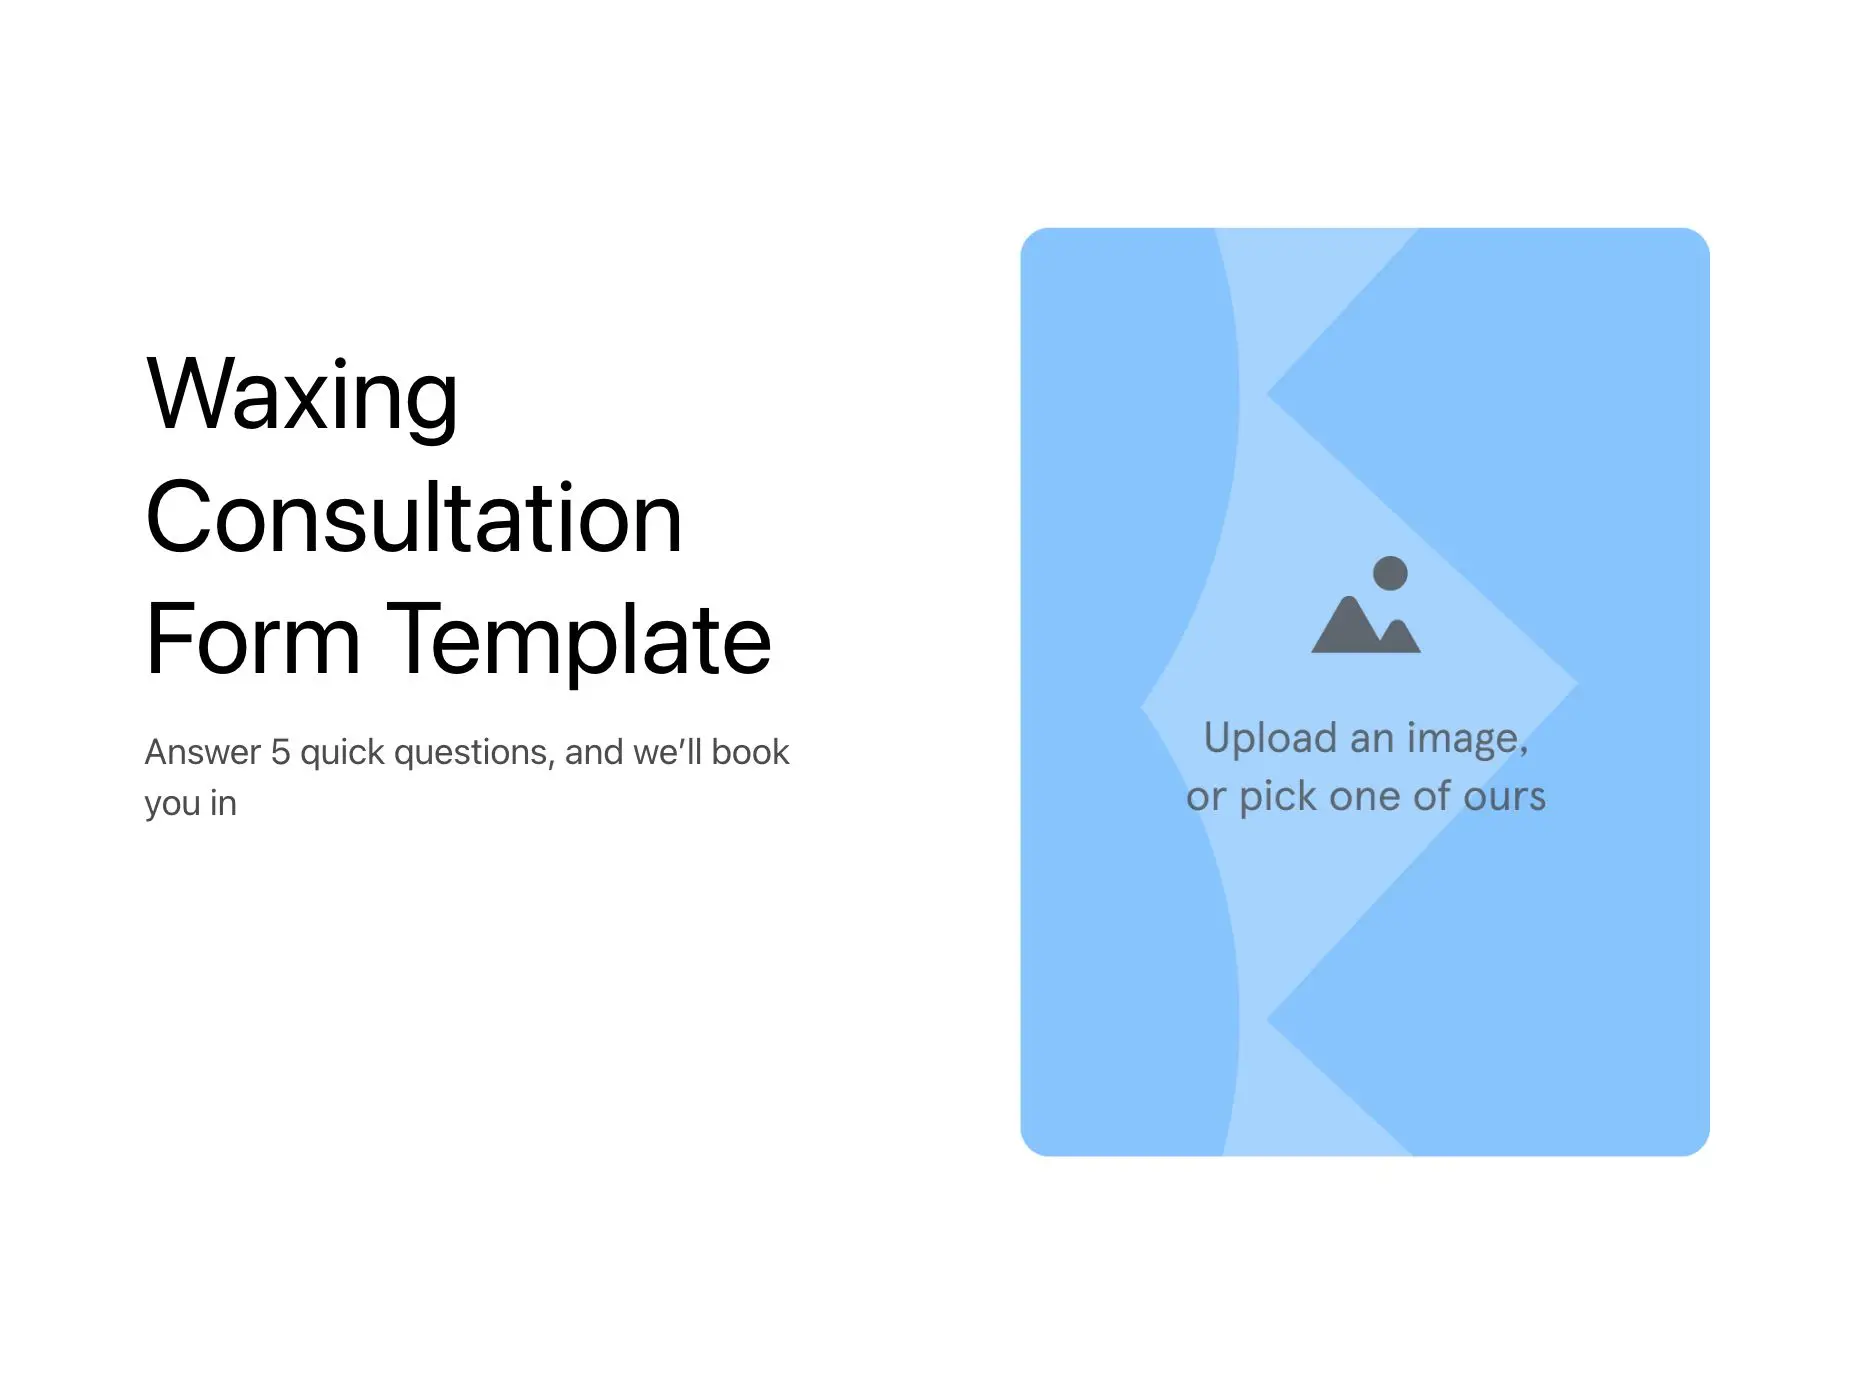 Waxing Consultation Form Template Hero